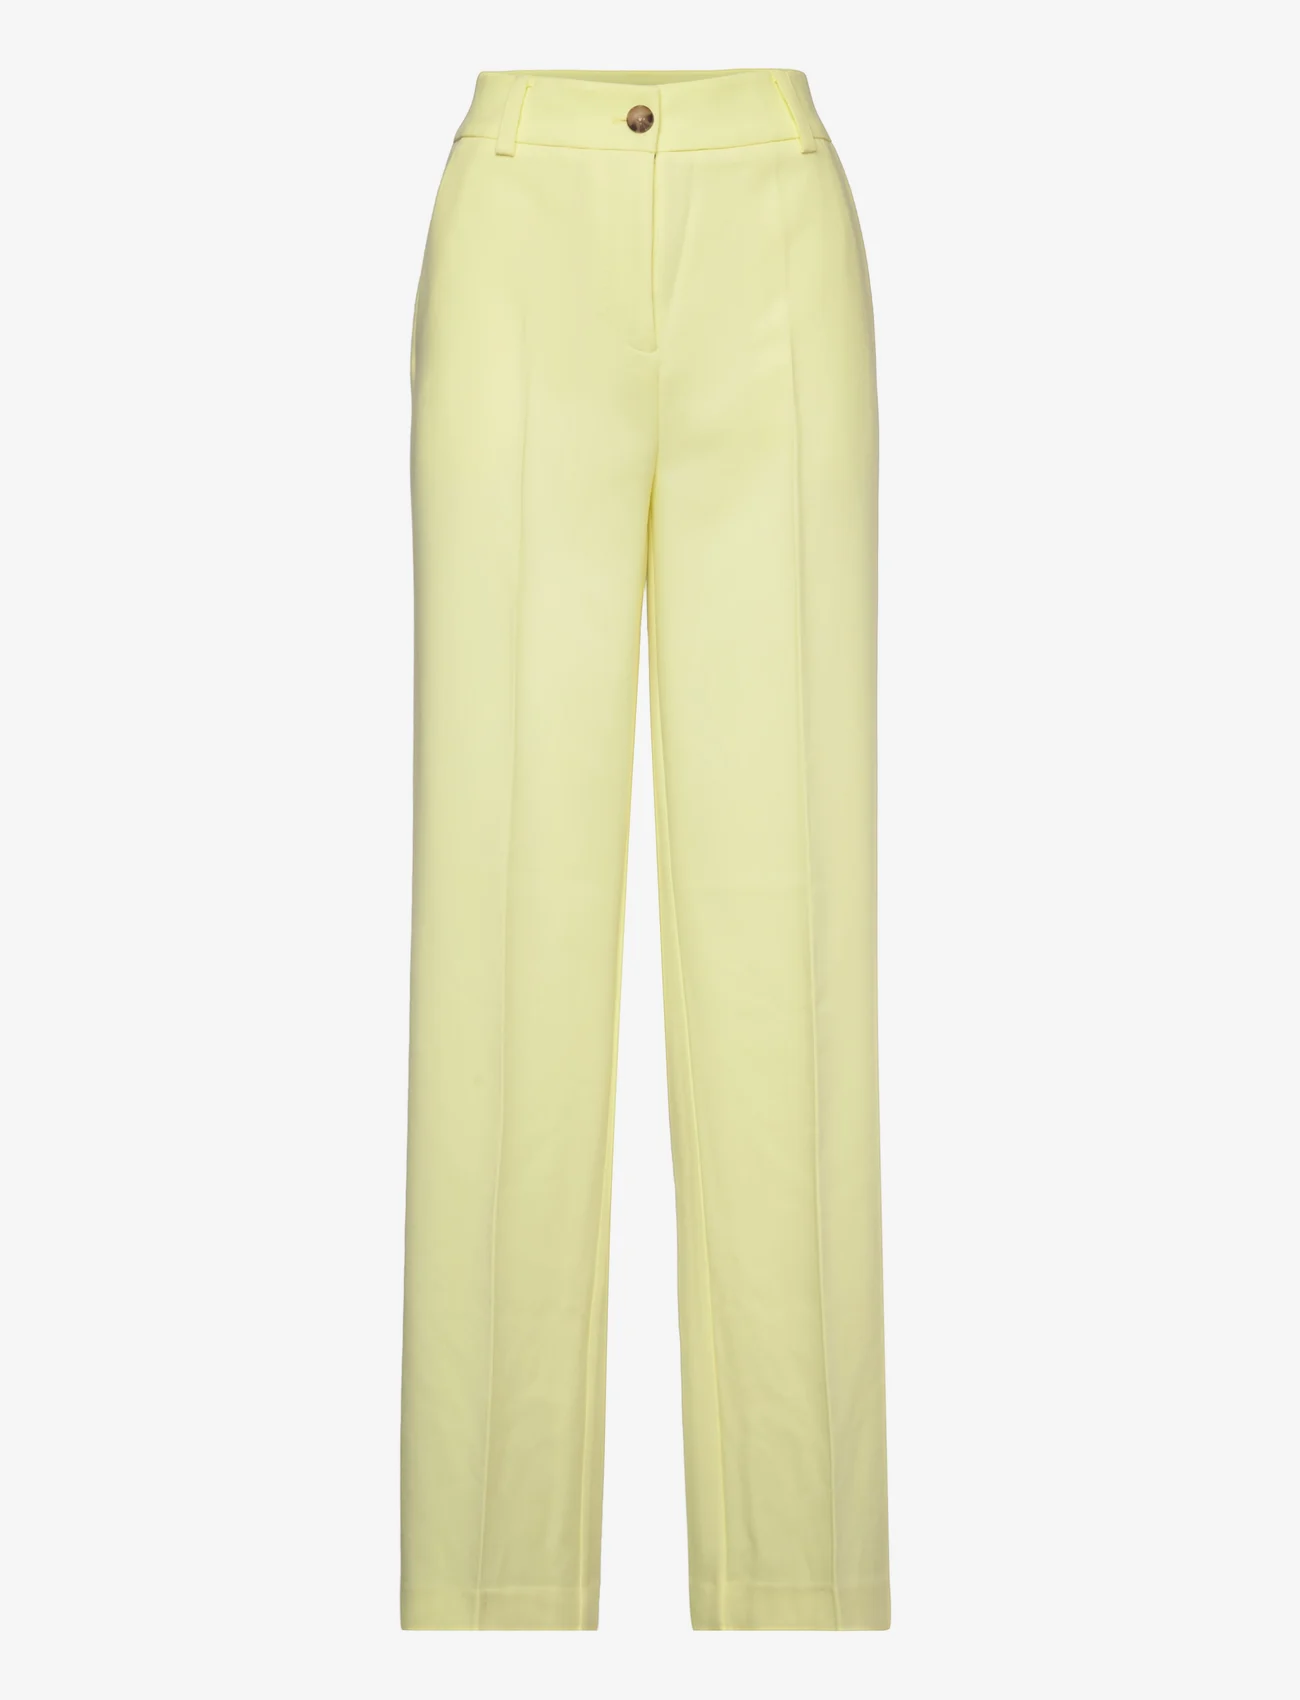 Modström - Gale pants - peoriided outlet-hindadega - yellow pear - 0